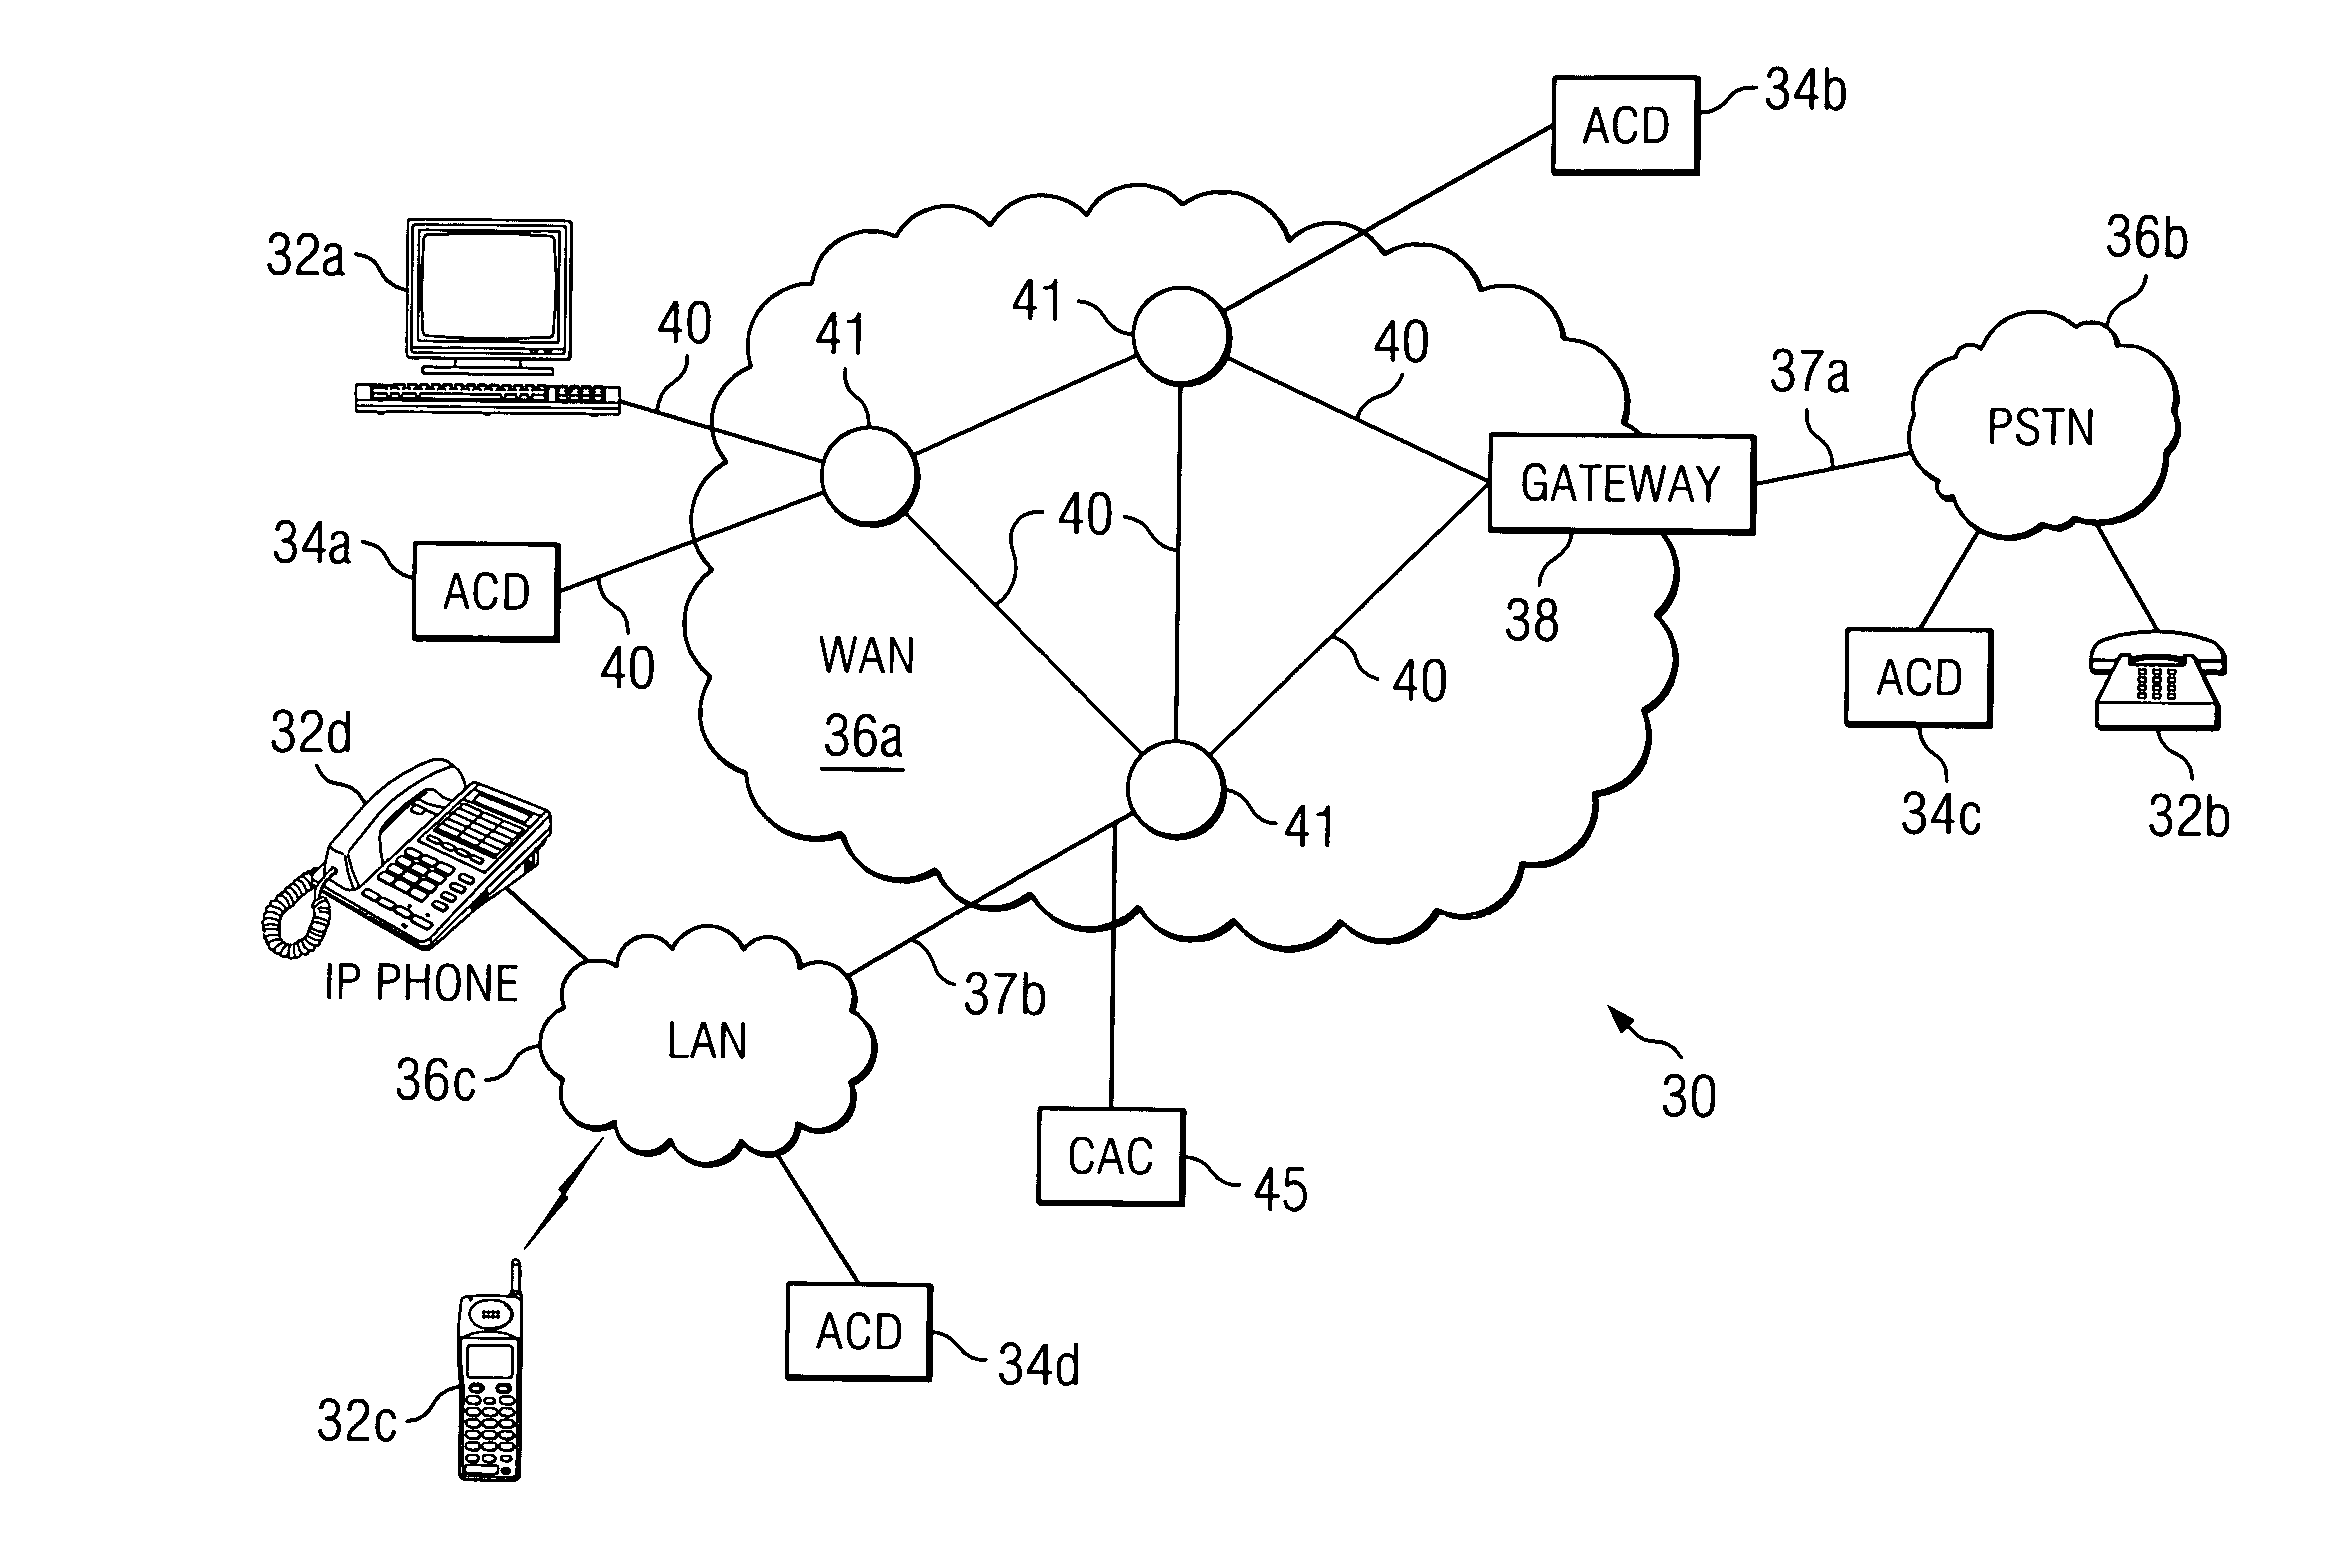 Method and system for managing calls of an automatic call distributor